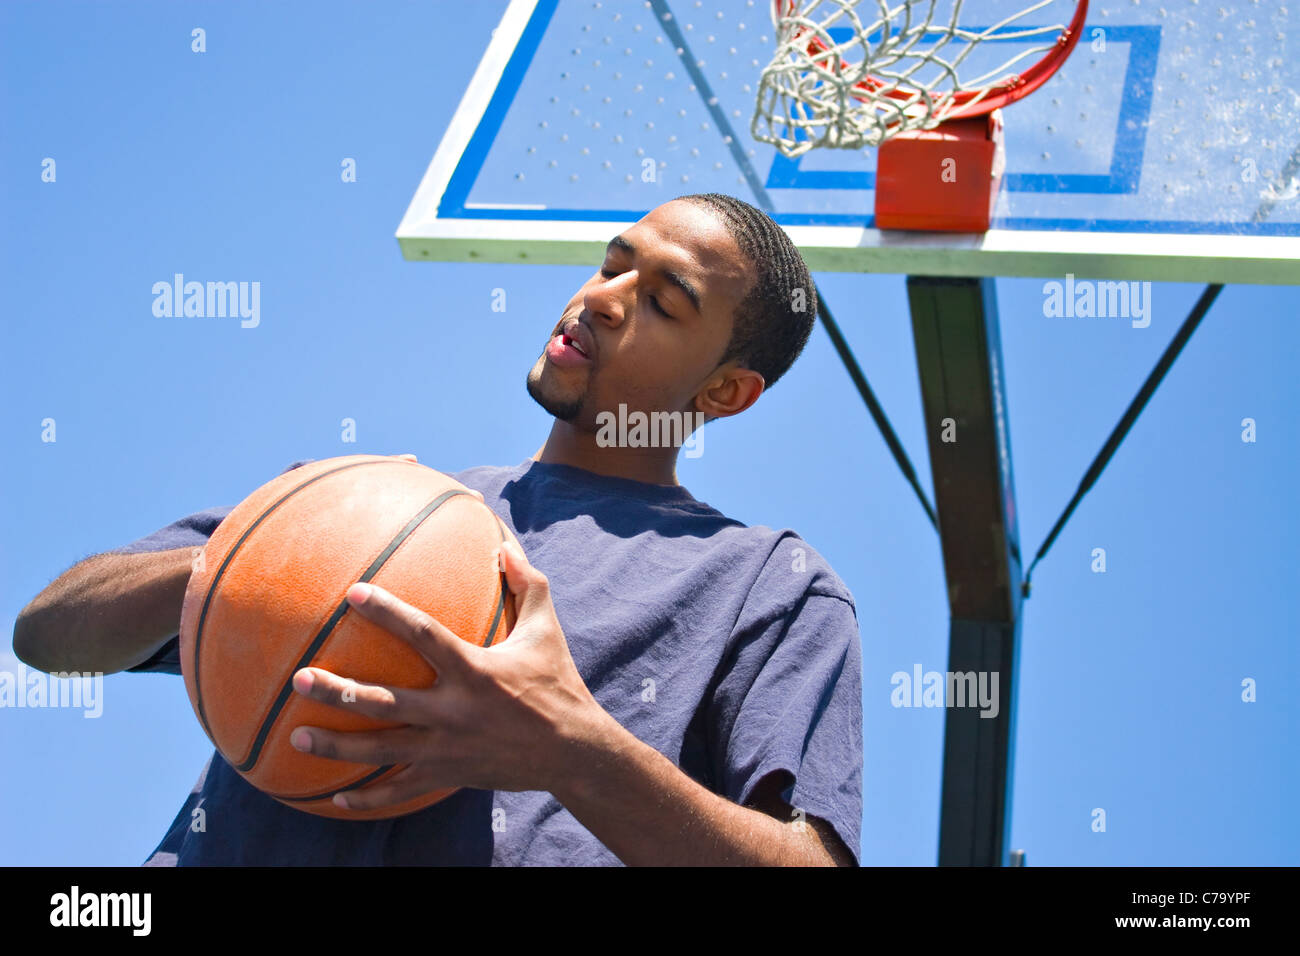 Depressed Male Basketball Player With Basketball Stock Photo, Picture and  Royalty Free Image. Image 106511707.